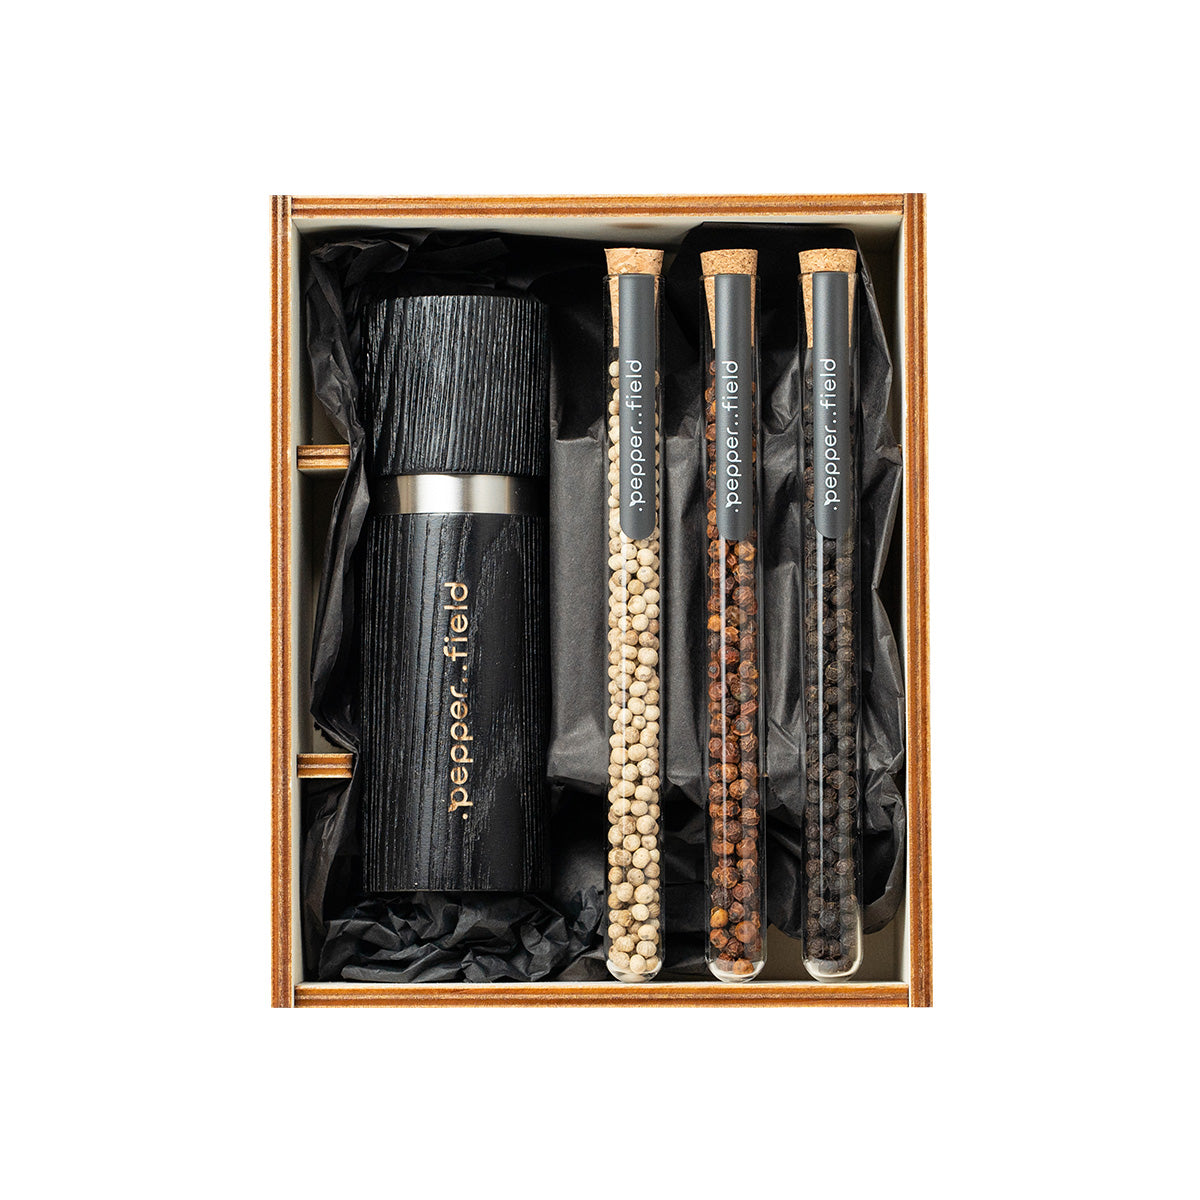 Kampot pepper - a set of tubes with a grinder in a gift box (3x10g)